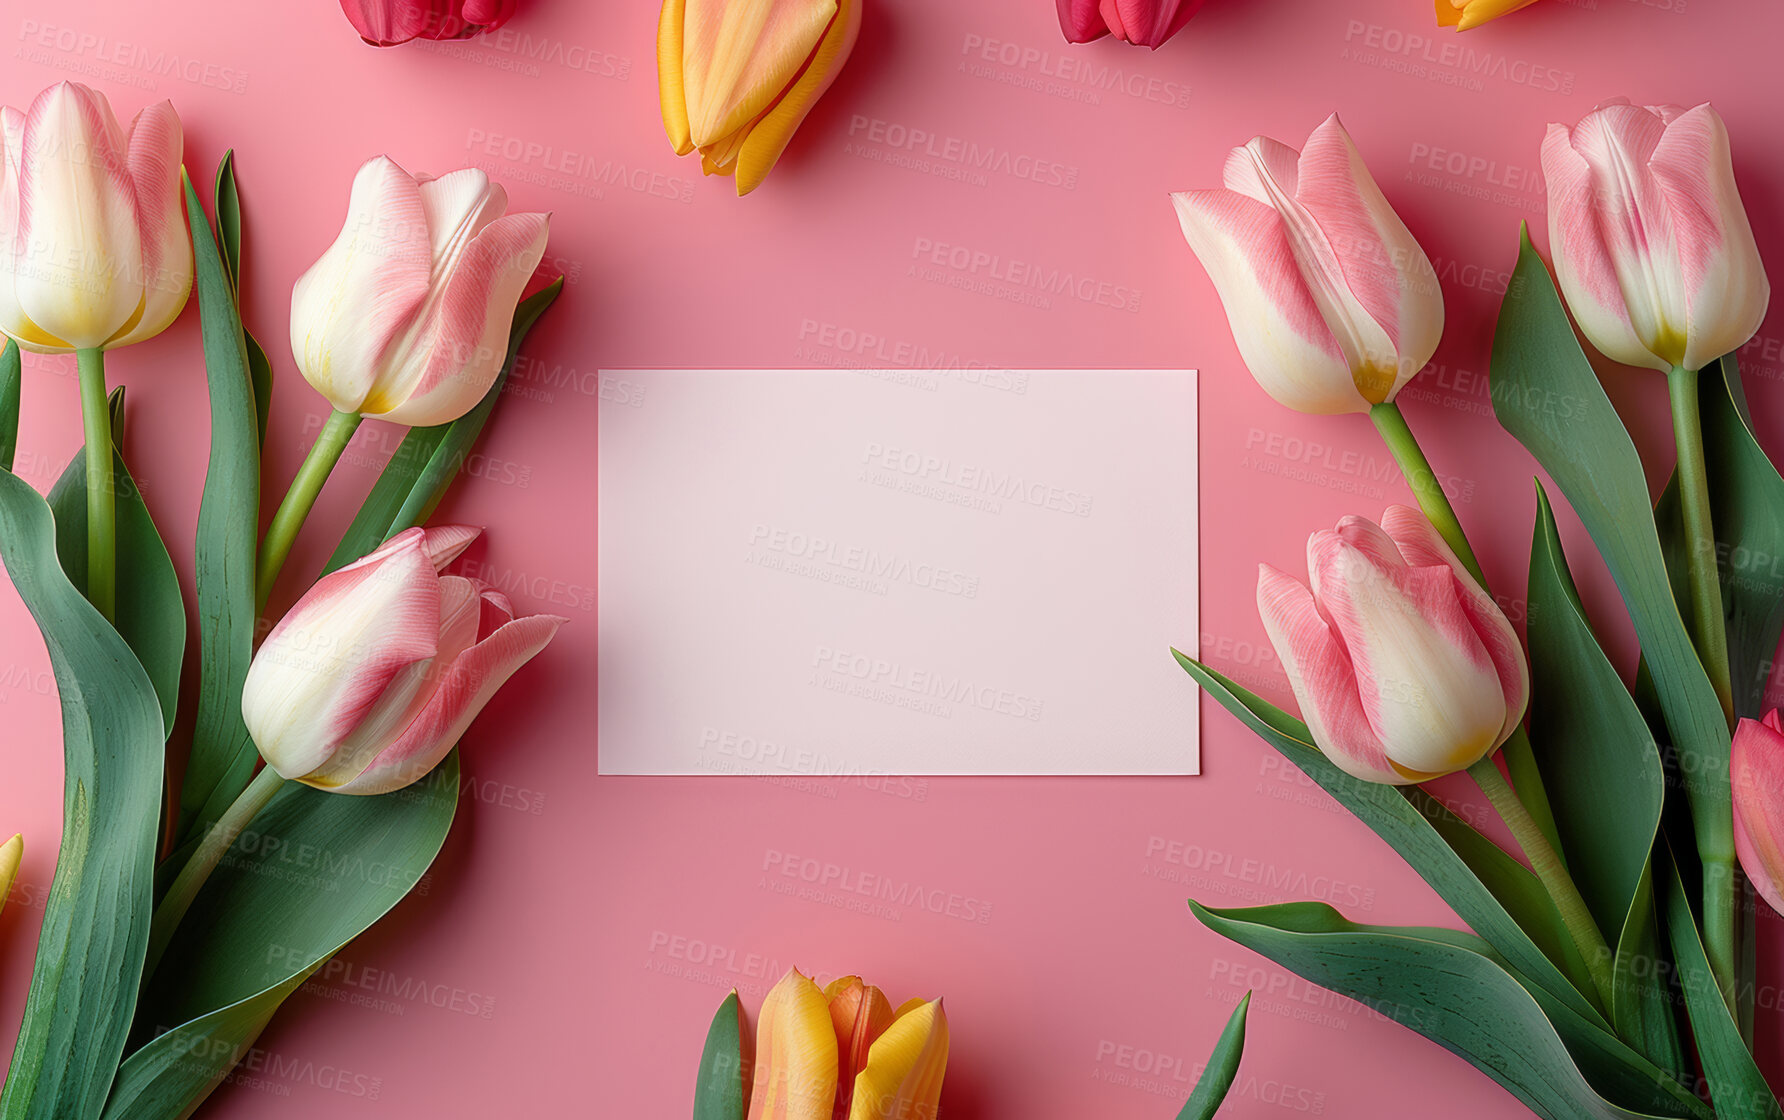 Buy stock photo Sticky note, card and love with roses for valentines day, anniversary or gift above on a pink background. Top view of empty space with bunch of flowers, leaves or petals by paper for message or post